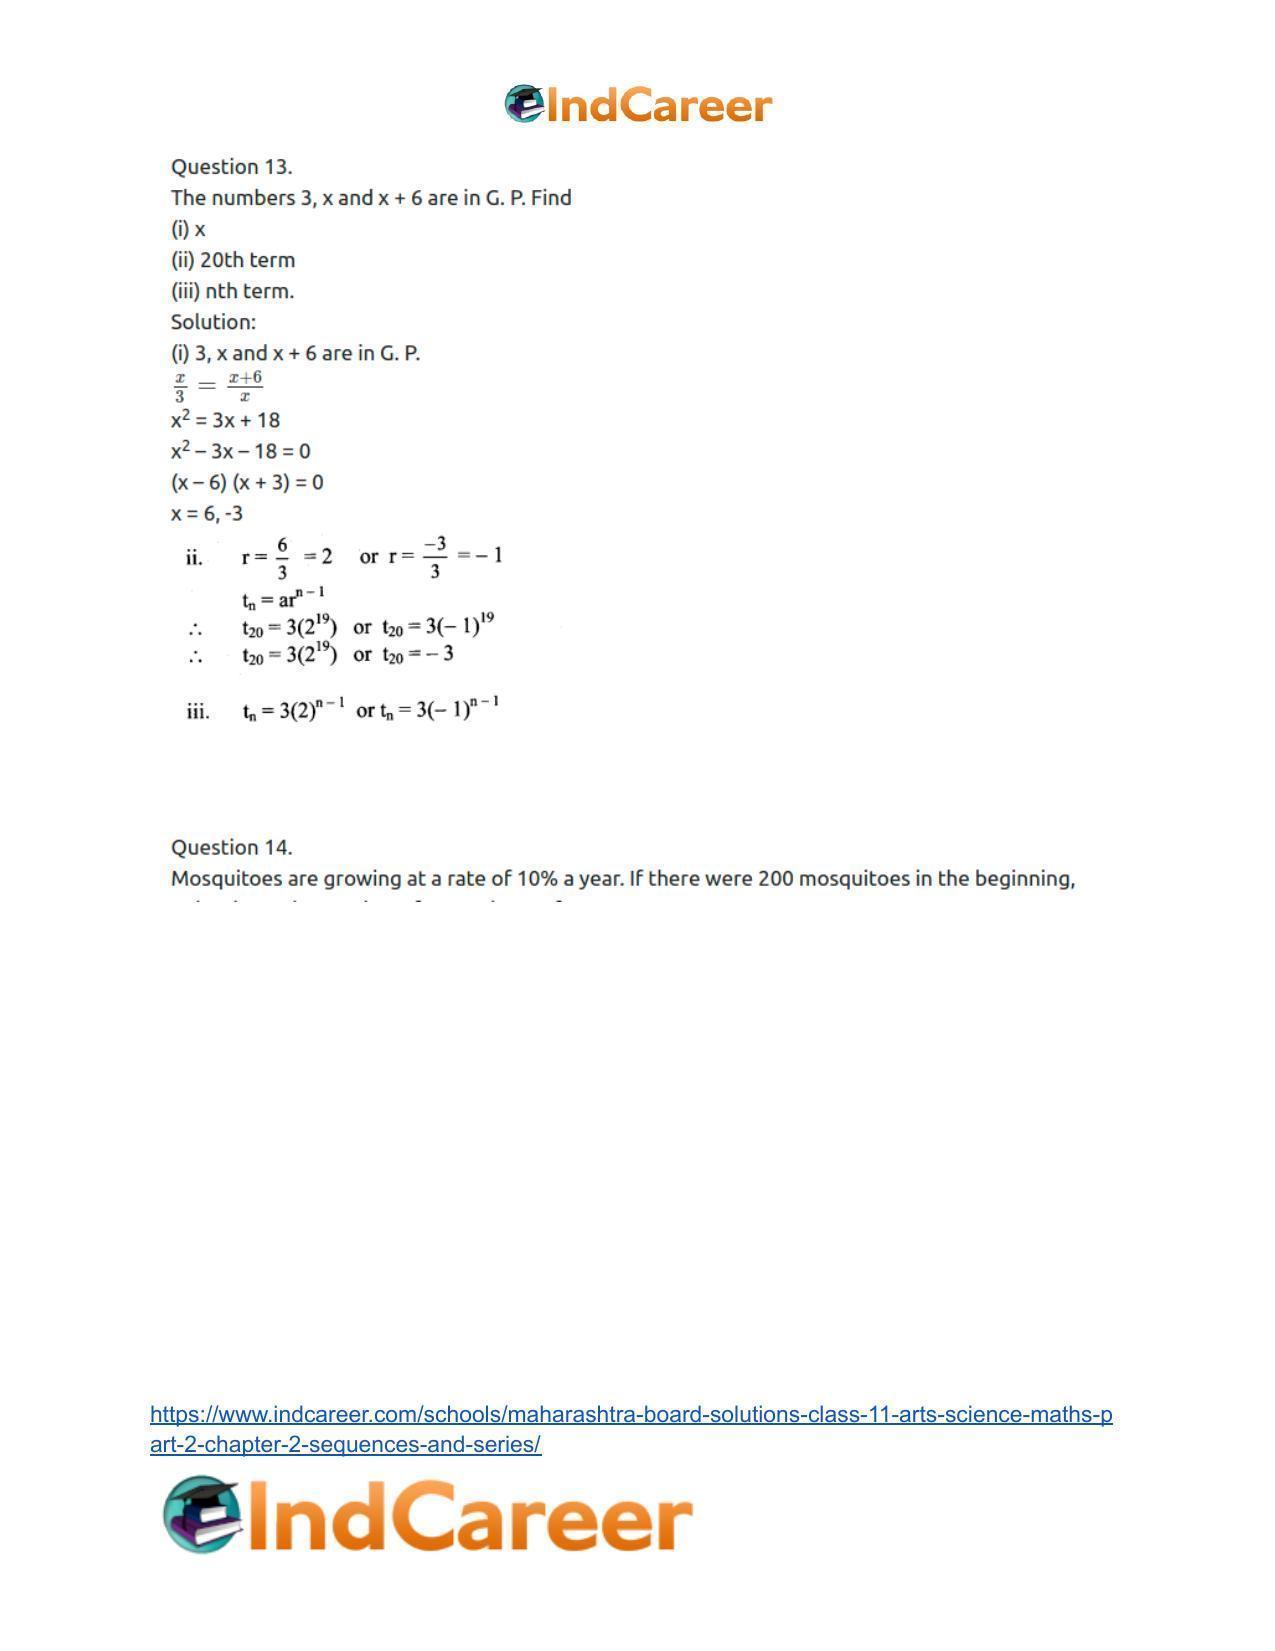 Maharashtra Board Solutions Class 11-Arts & Science Maths (Part 2): Chapter 2- Sequences and Series - Page 18